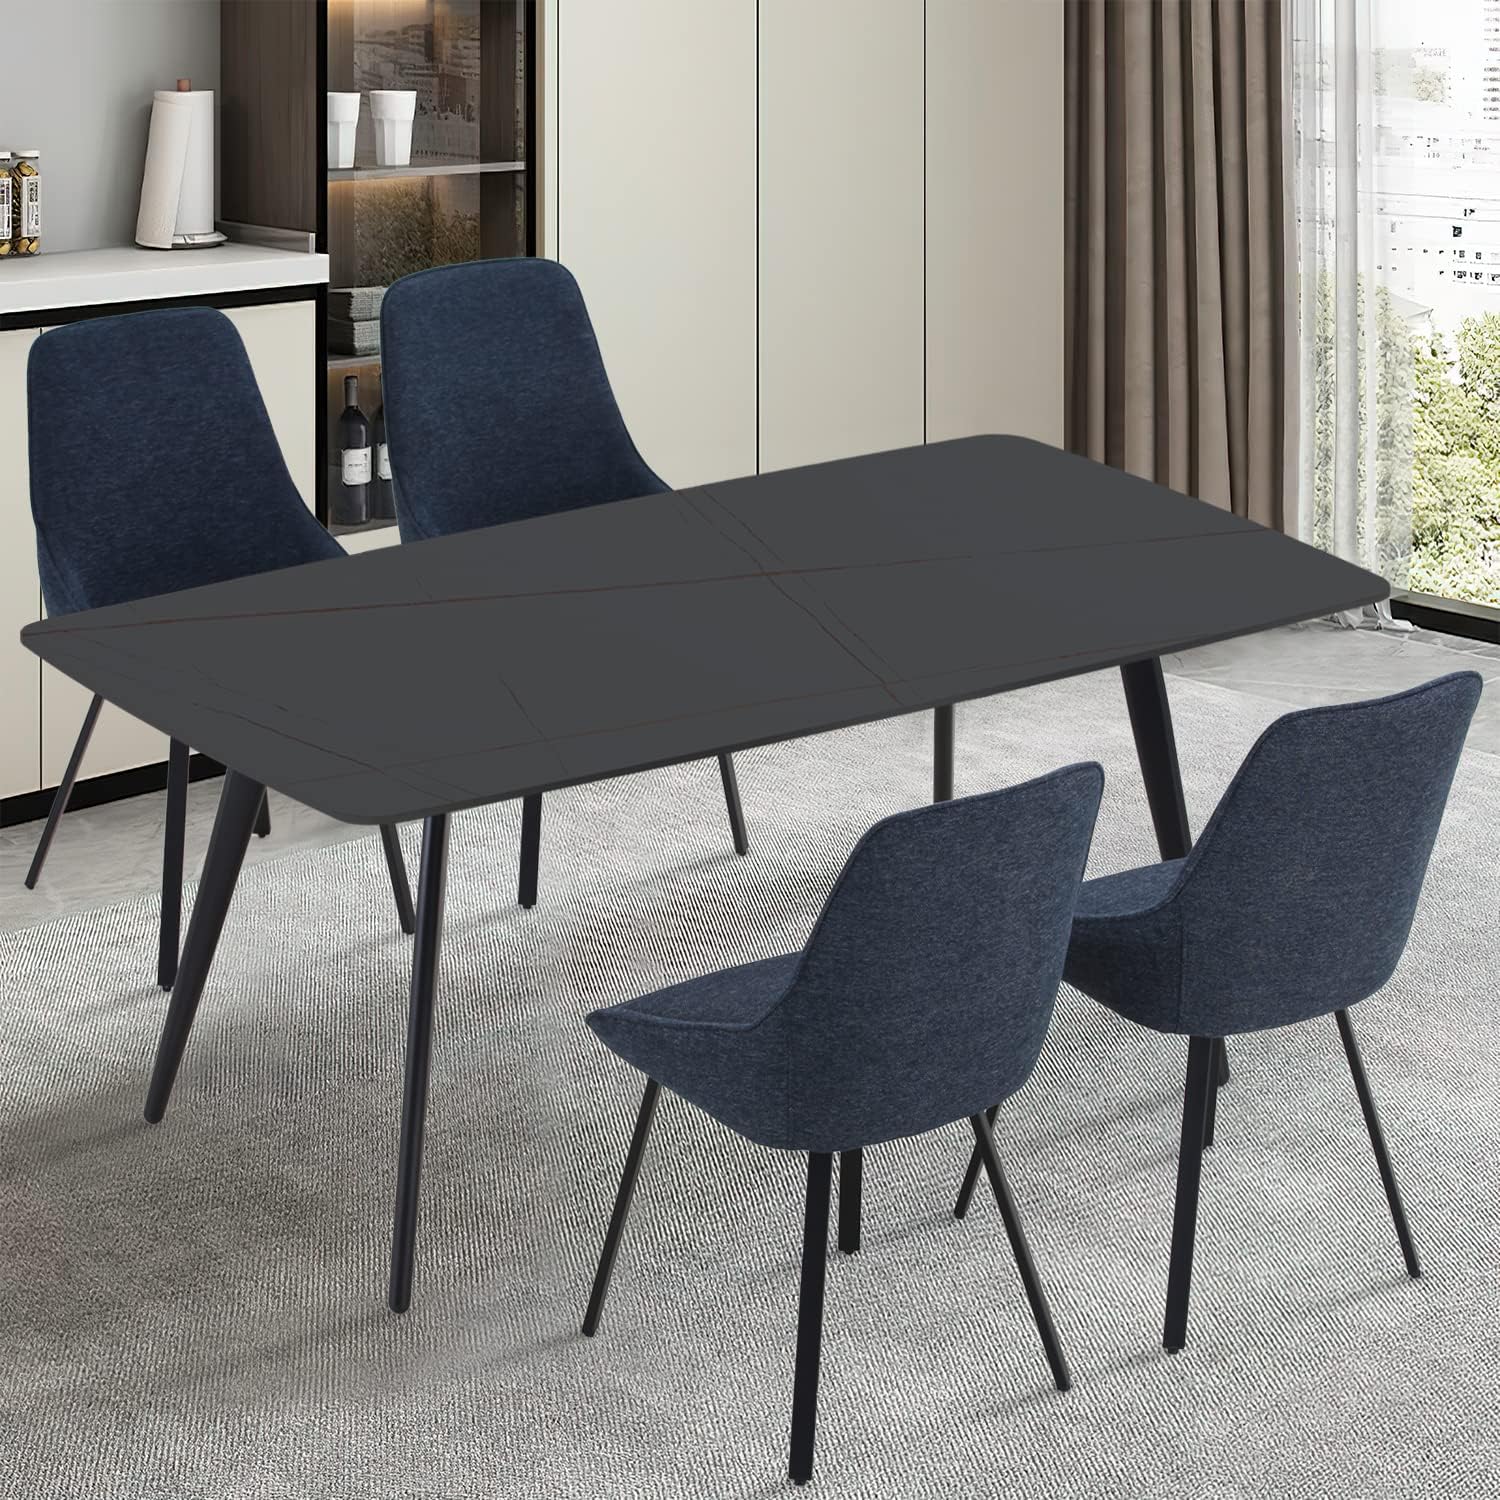 WILLIAMSPACE 62 Dining Table with Sintered Stone Top and Metal Legs, Modern Slate Kitchen Dining Table for Living Room, Dining Room, Home and Office (Black)